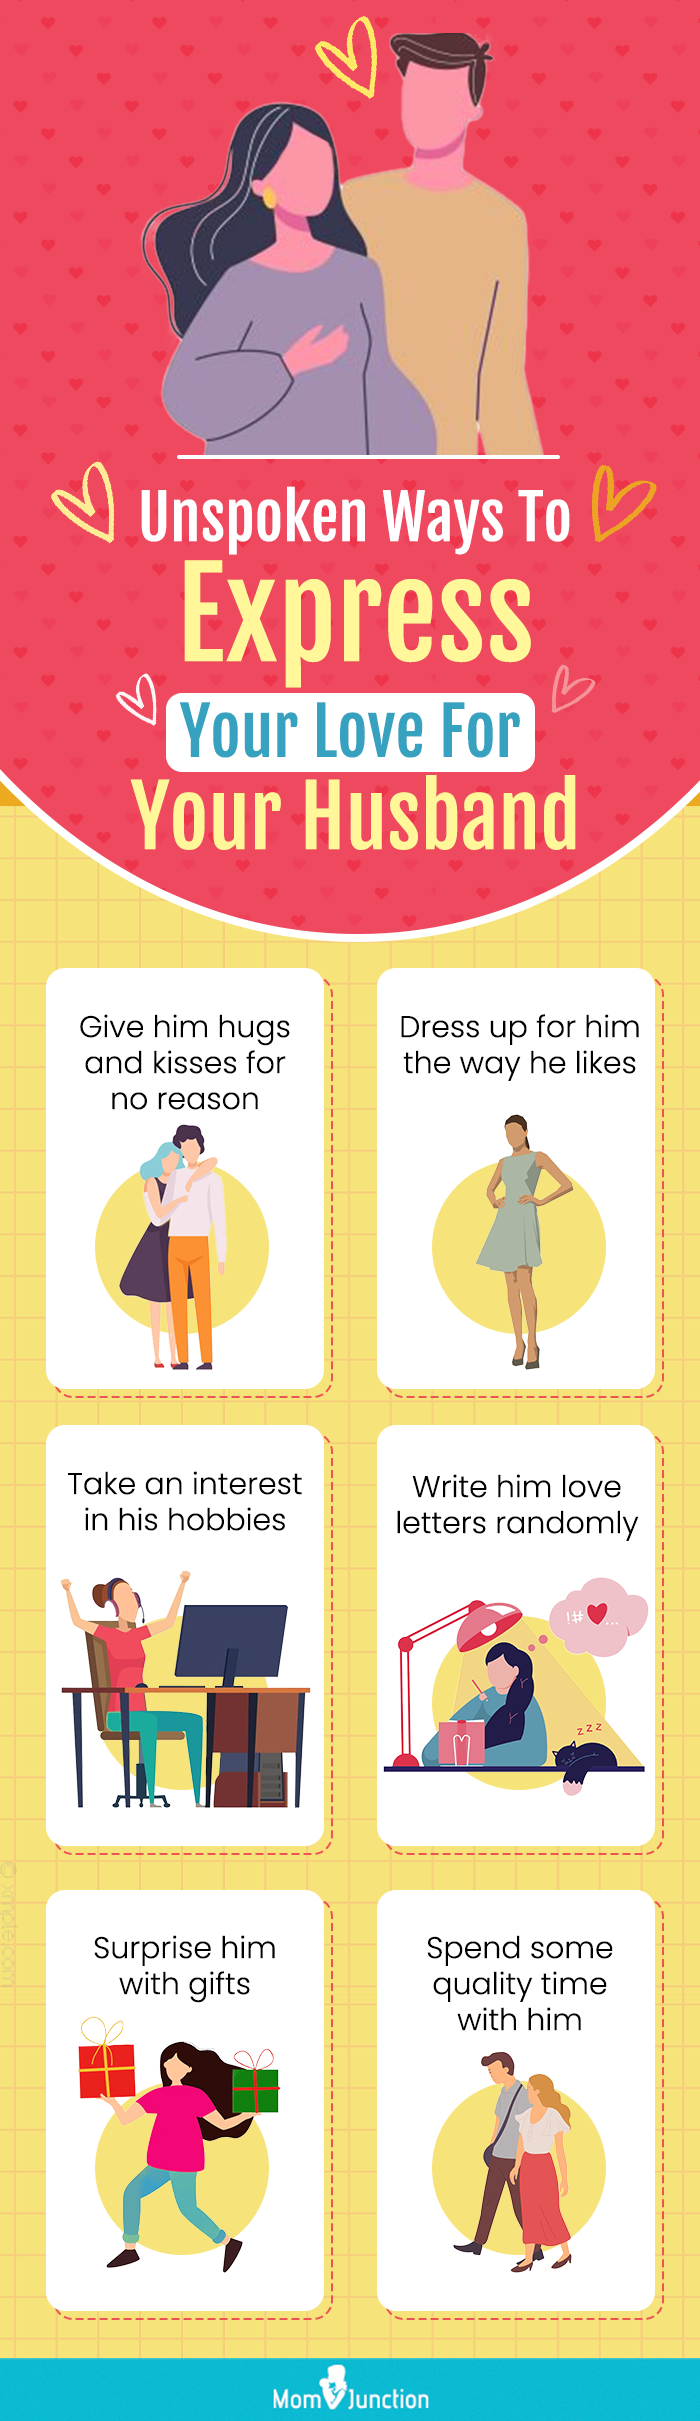 ways to express your love to your husband (infographic)